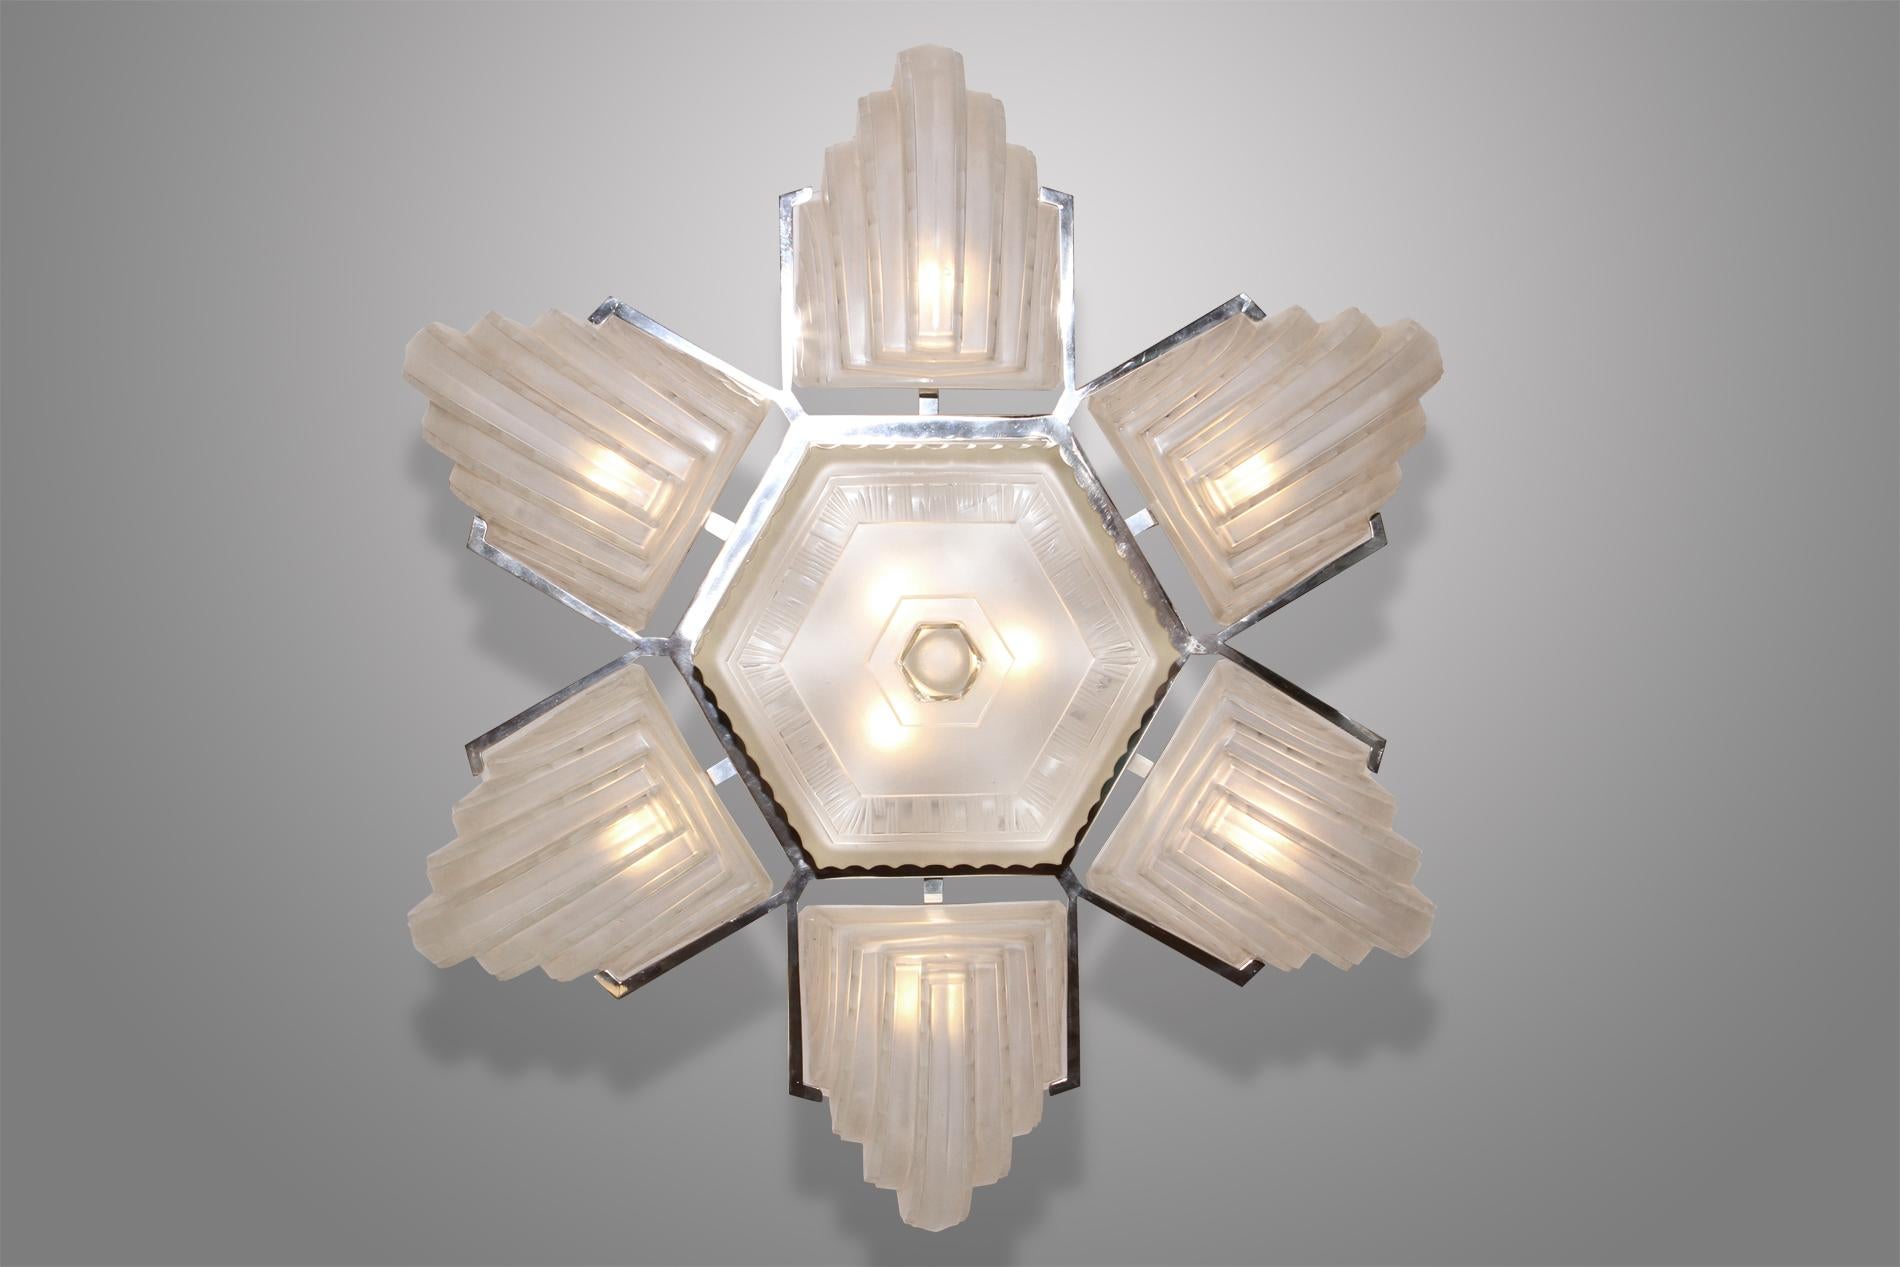 French art deco chandelier from 1930 made by the illustrious Sabino workshop in France around 1930. 

The chandelier presents a geometrical glass work and its linear forms is typical of the art deco period. The 7 glasses are attached to a